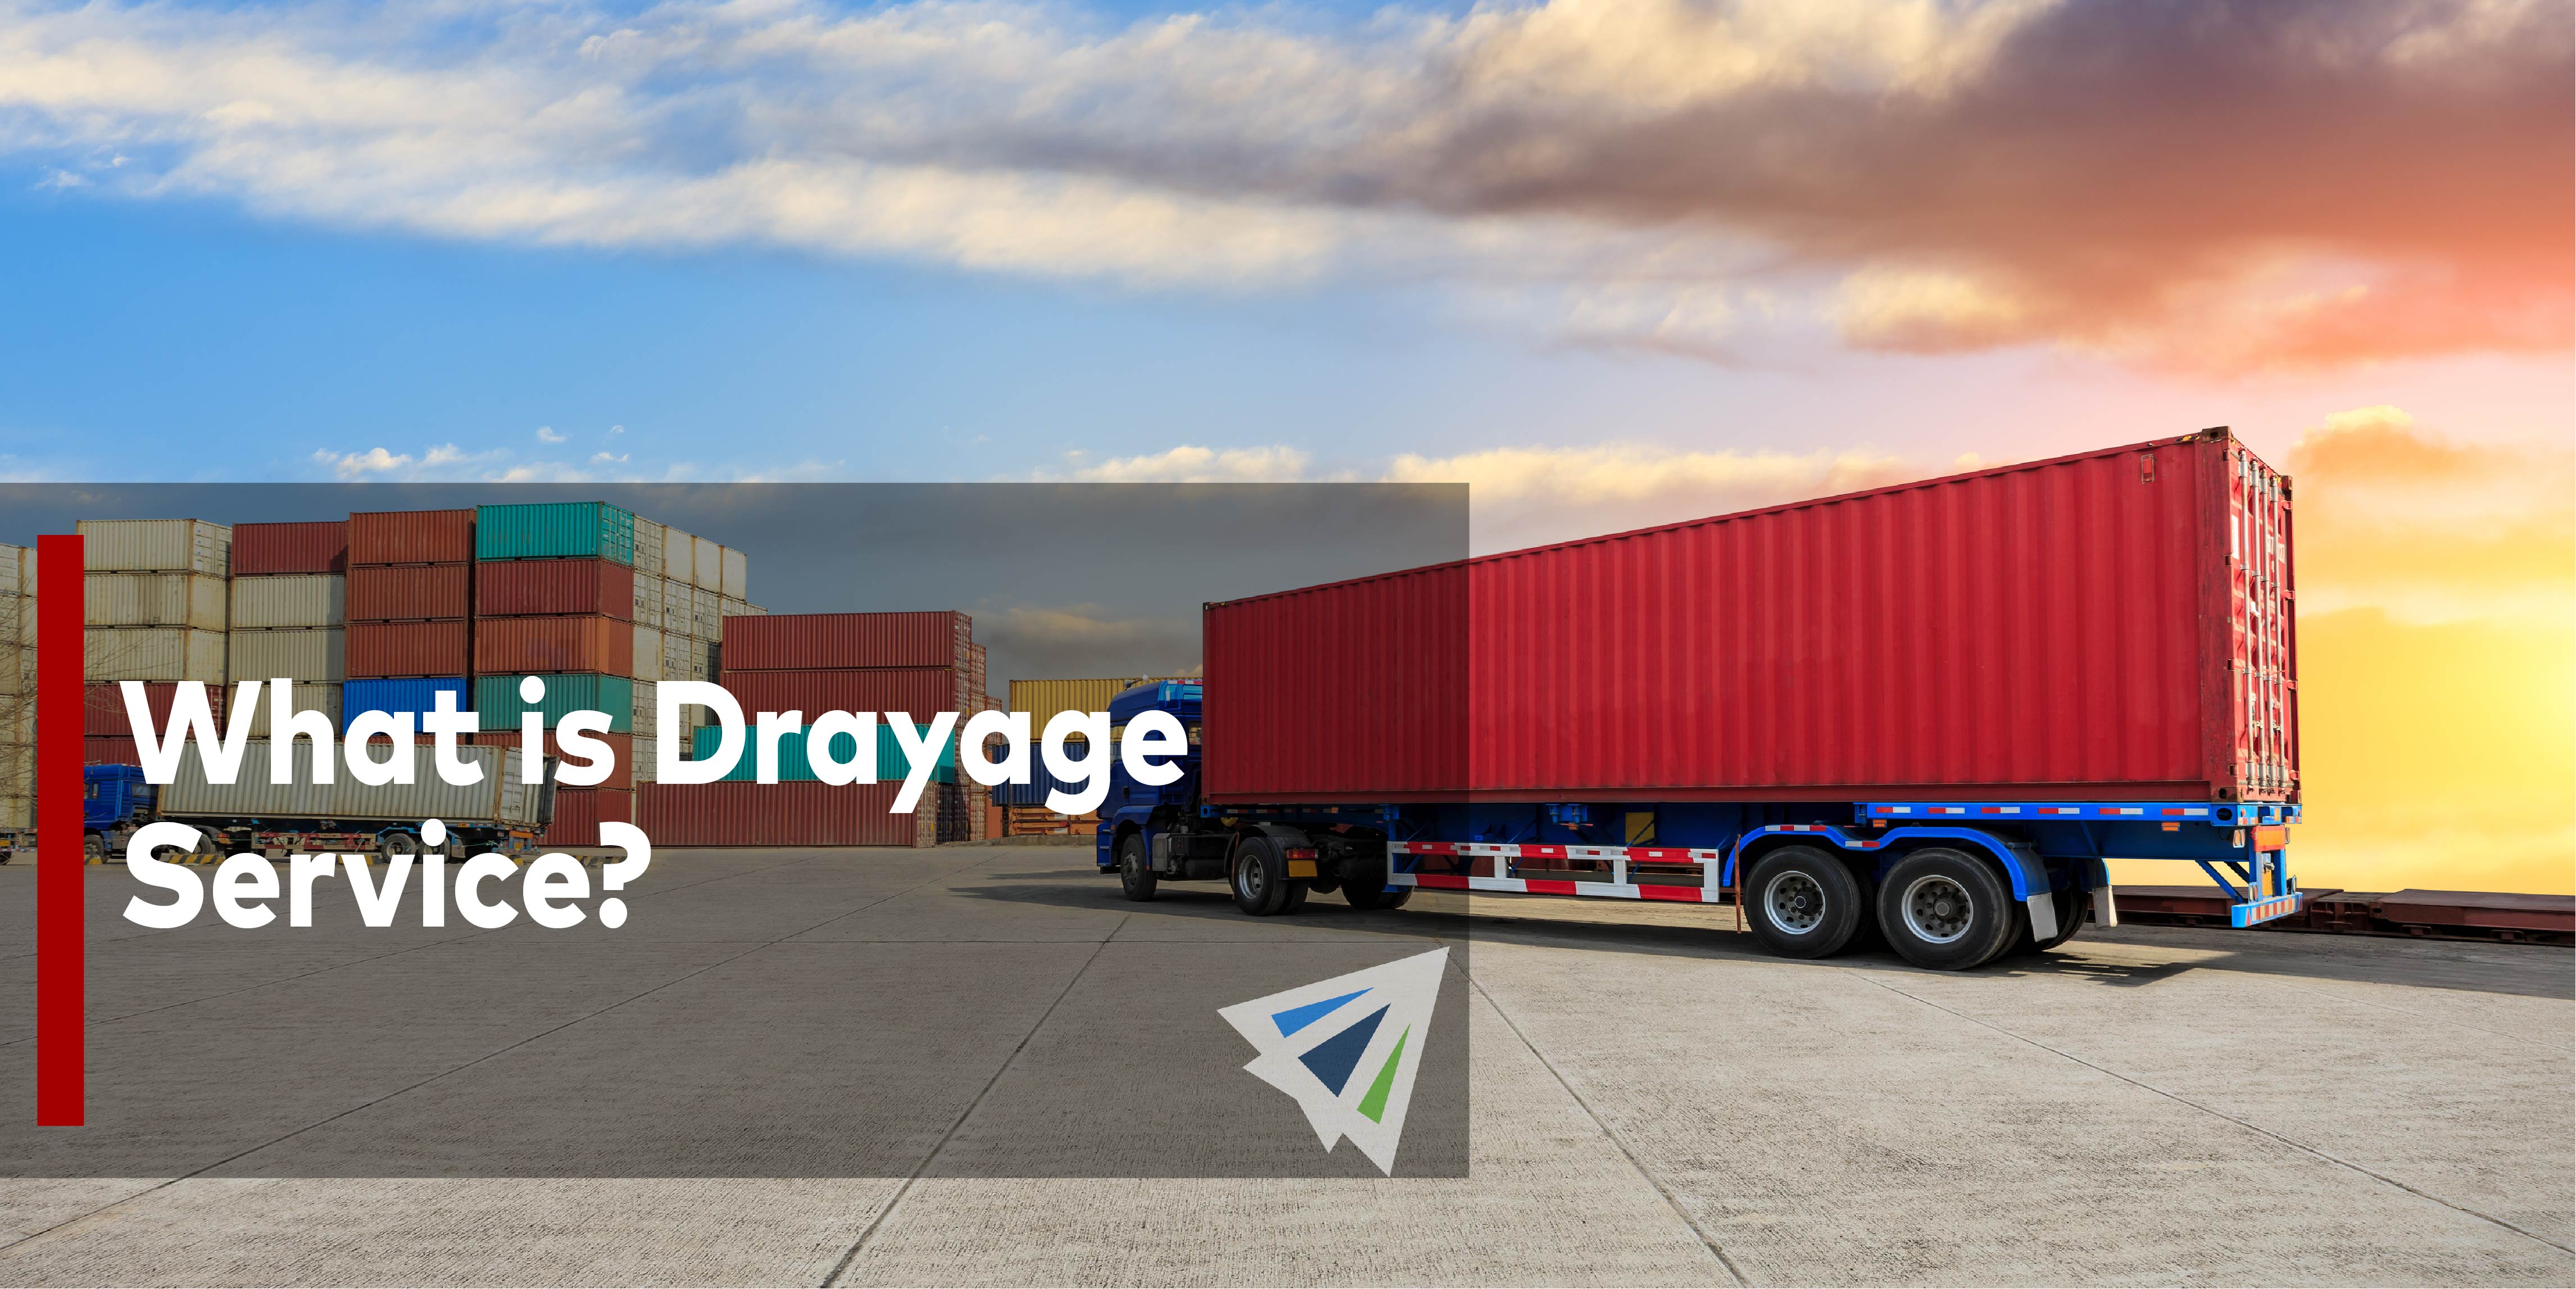 What is Drayage Service?